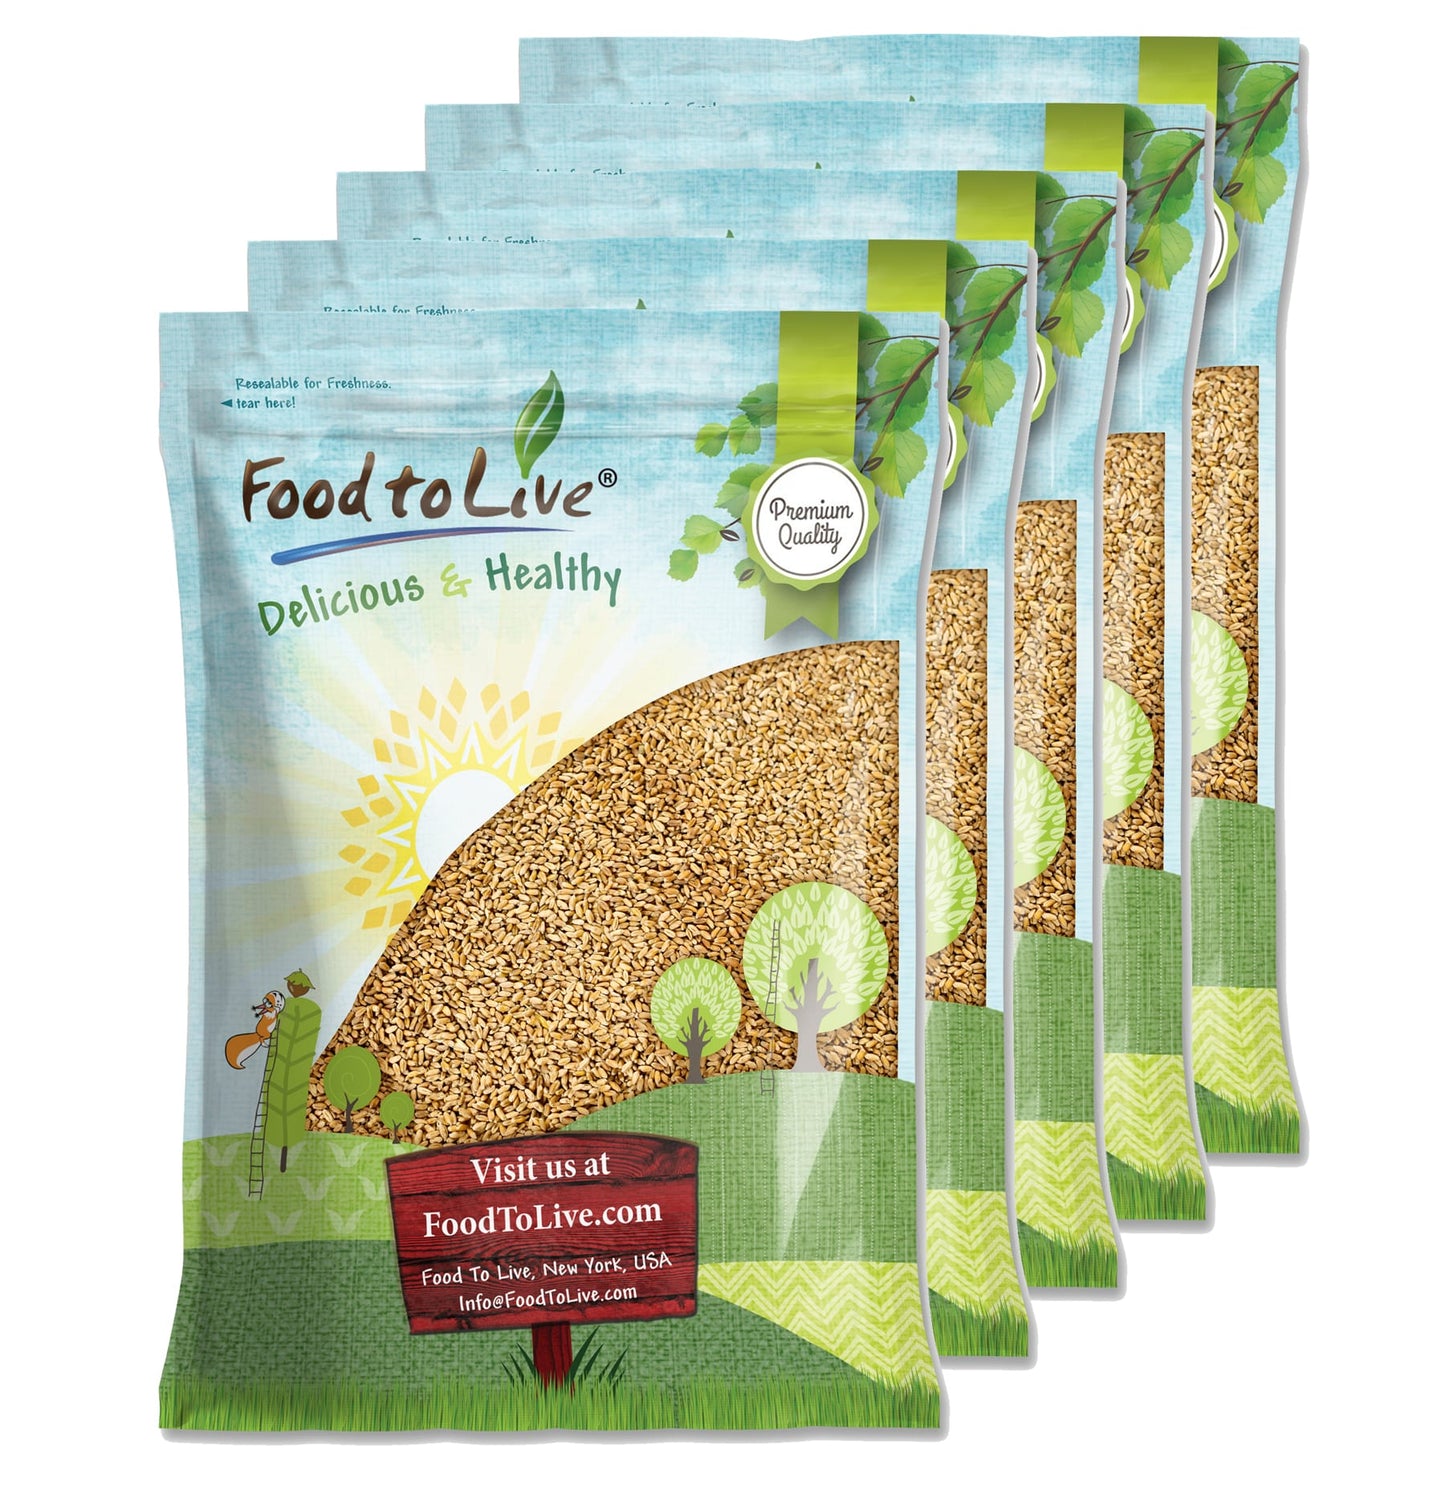 Wheat Berries — Non-GMO Verified, Sprouting for Wheatgrass, Kosher, Raw, Vegan, Bulk - by Food to Live